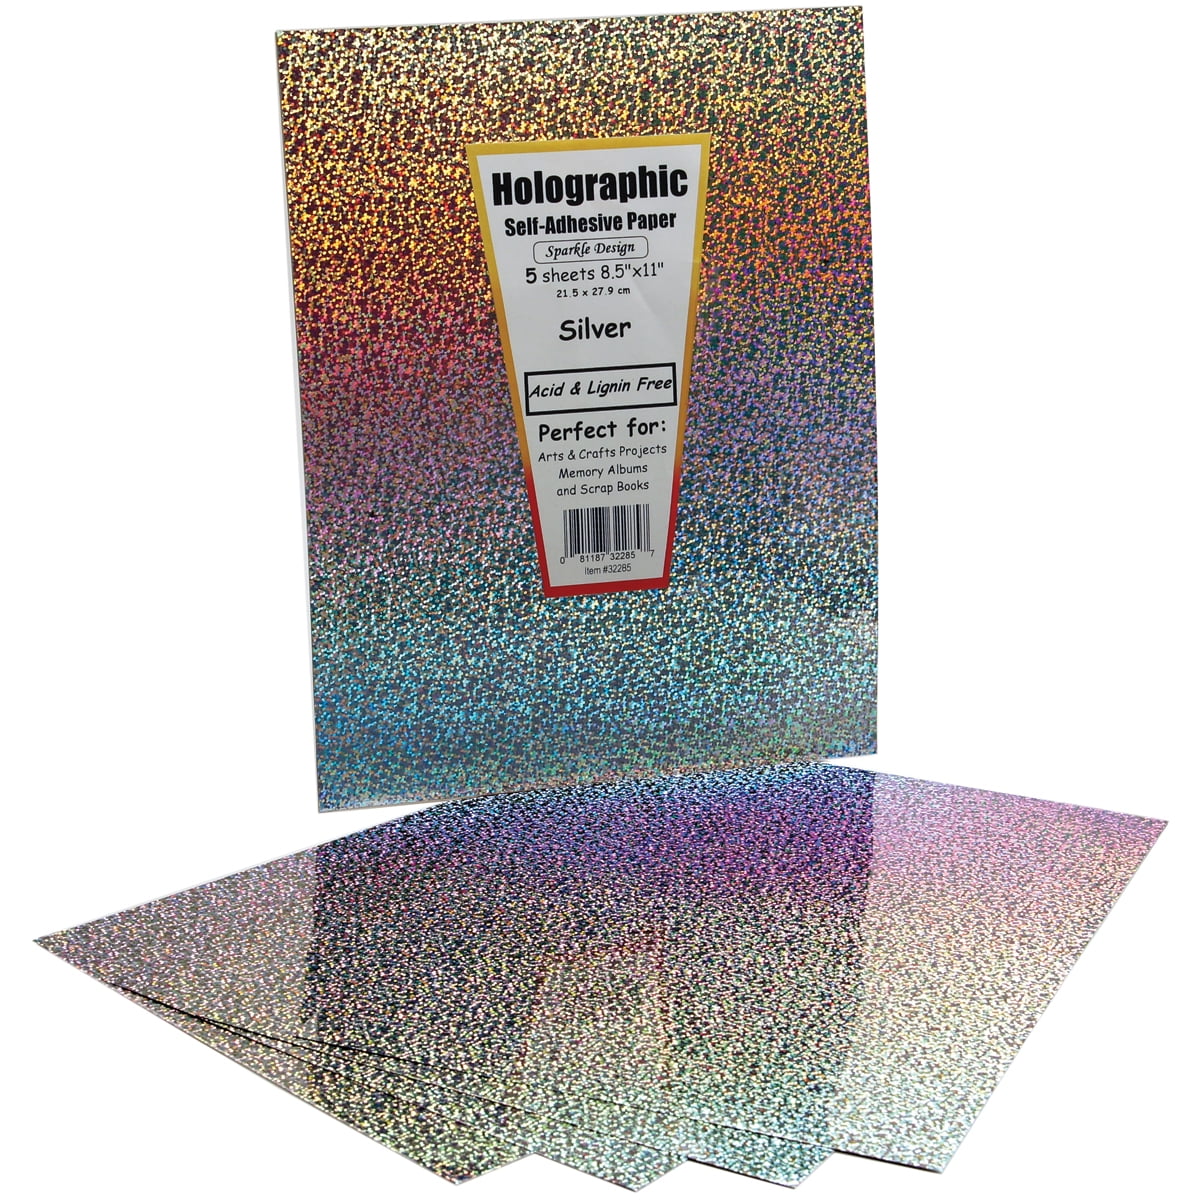 ✂️ 5 Mirror Silver Self Adhesive Foil Paper 9 x 7 Specialty Sheets Low Tack 